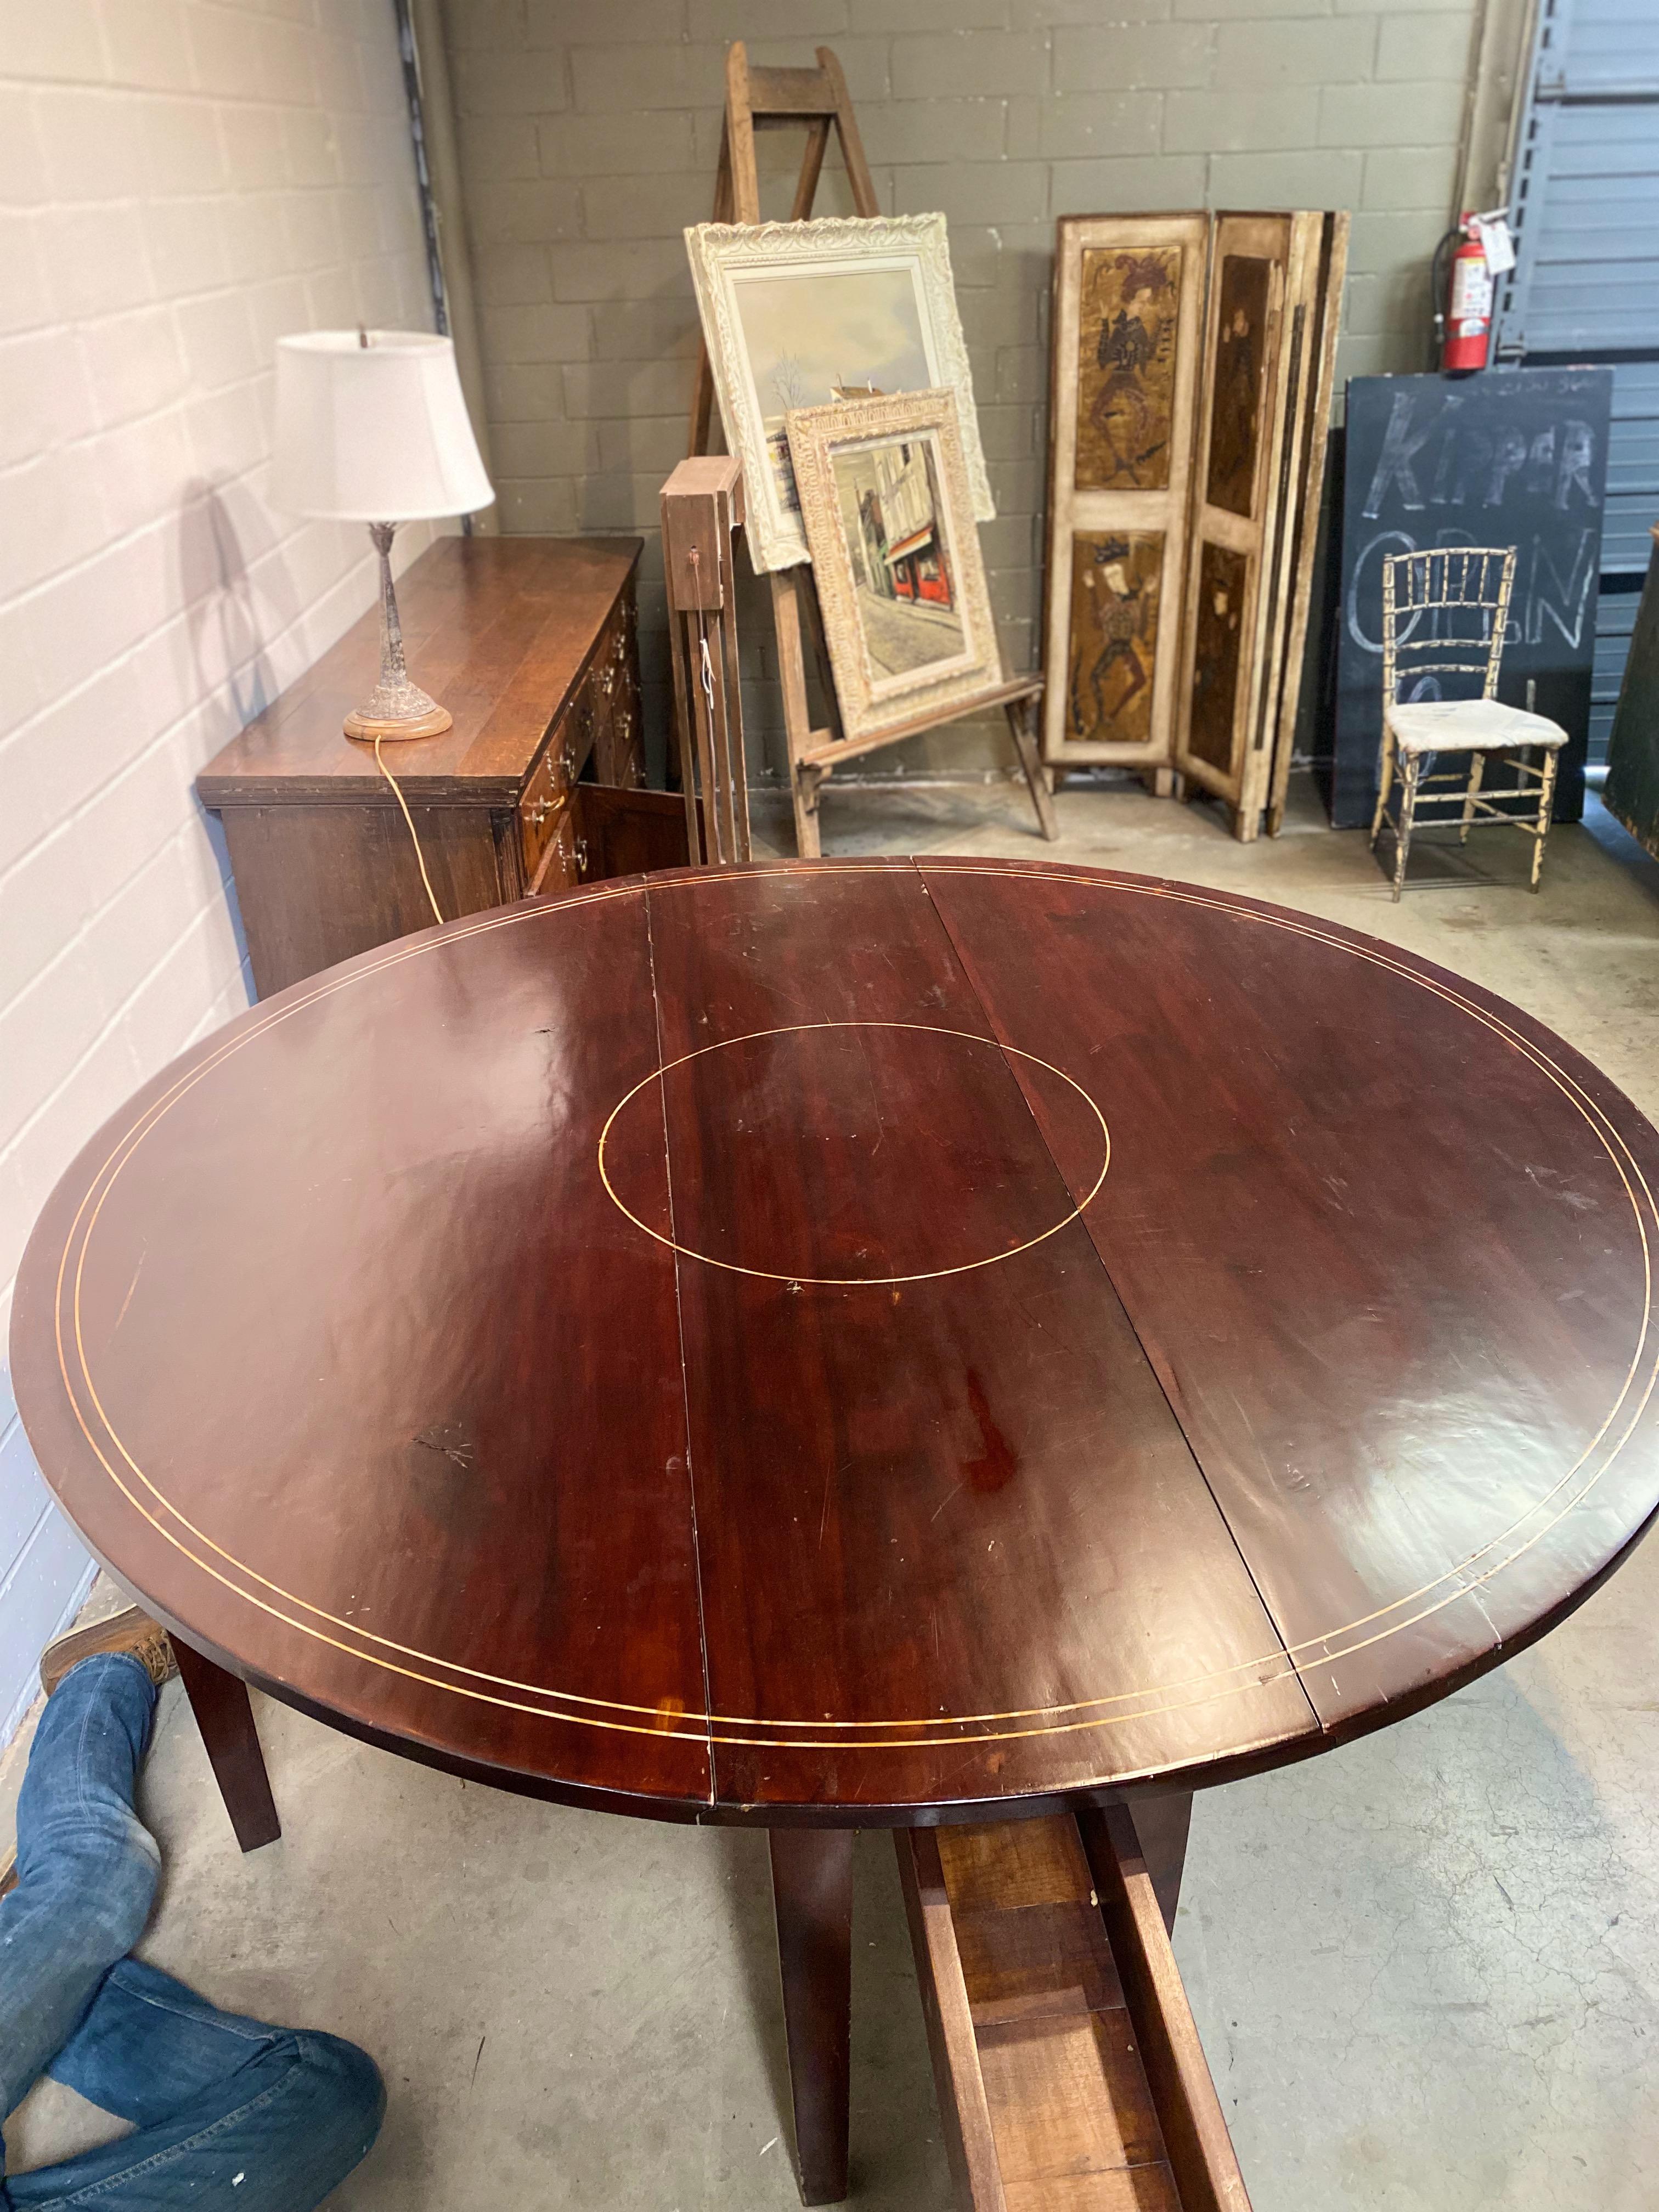 A stunning late 19th century Cherry Mahogany drop-leaf table that was previously used as a tasting table in a wine cellar. This table boasts a unique acrylic inlay on the top, adding a touch of elegance to its already beautiful design. The table is